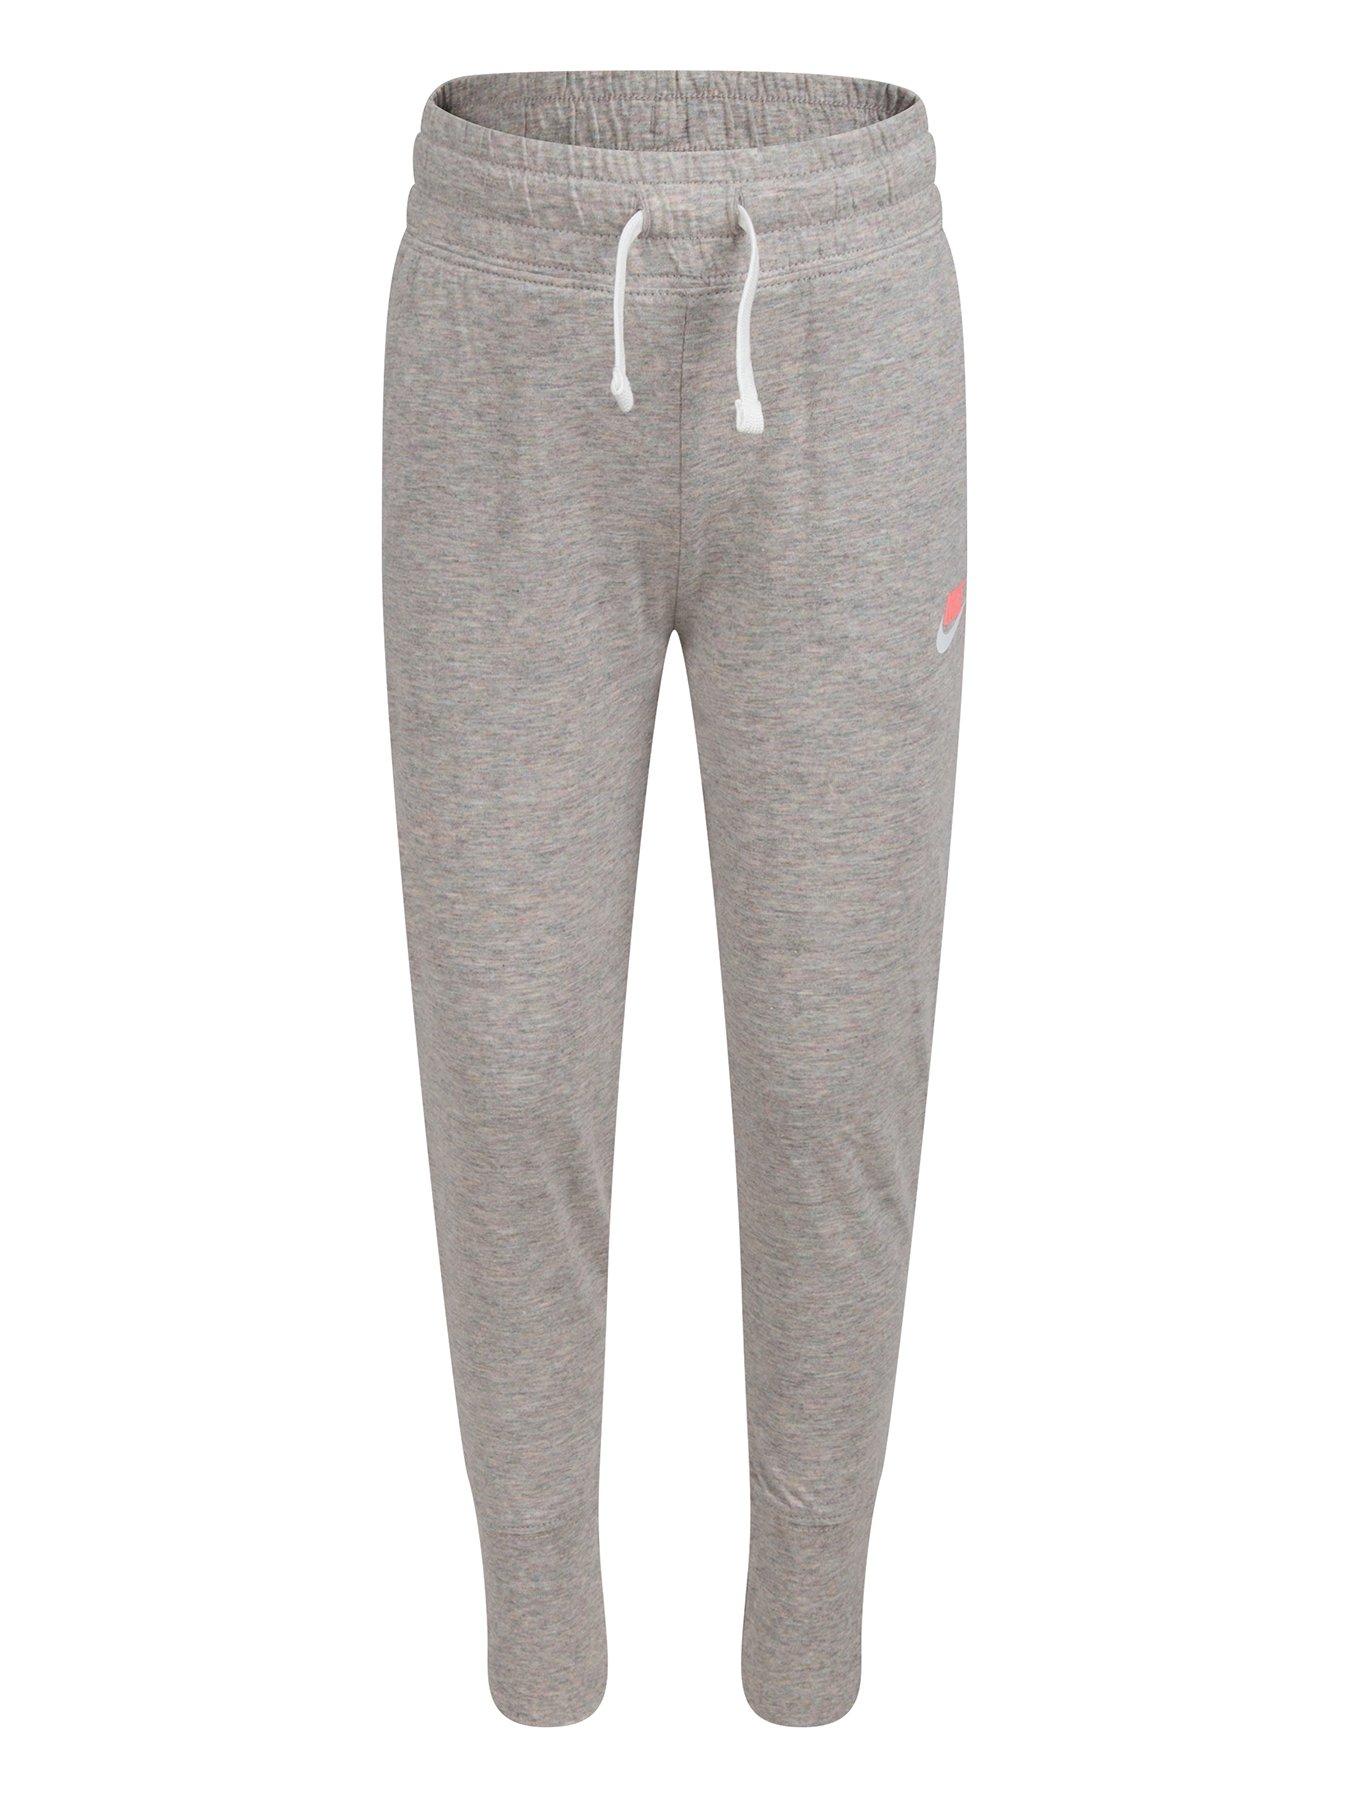  Younger Girls Knit Jogger - Grey